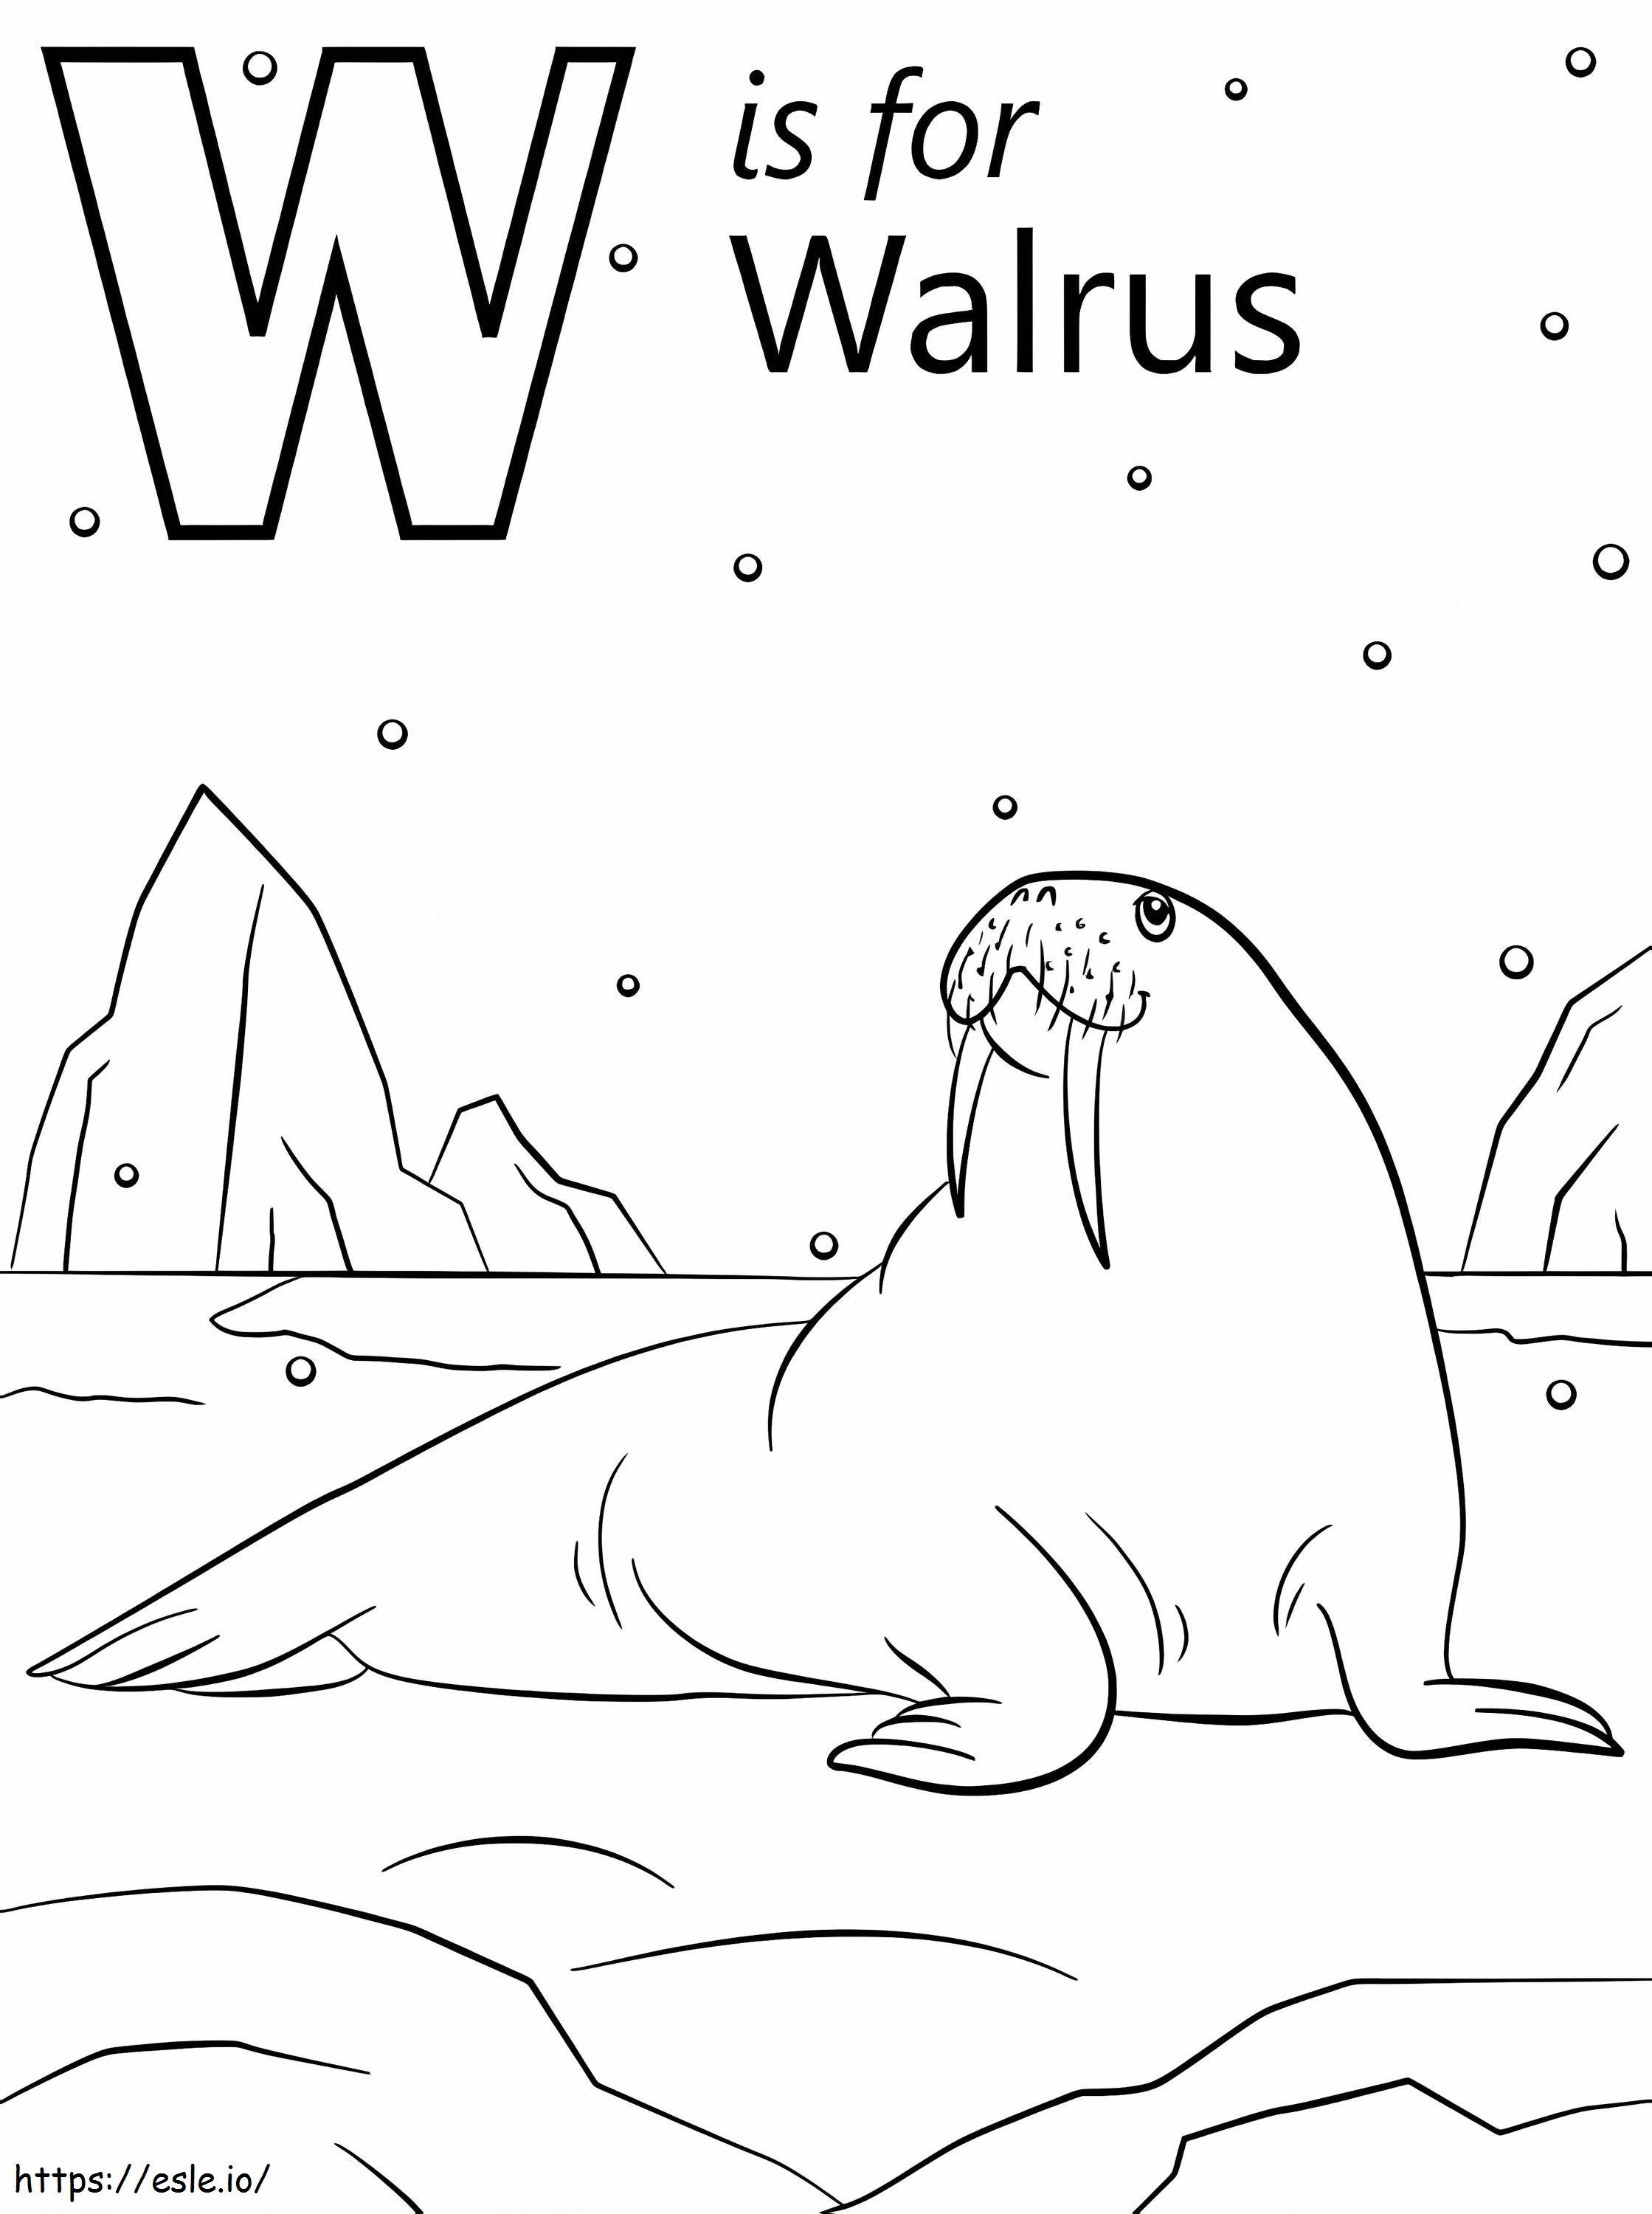 Walrus Letter W coloring page